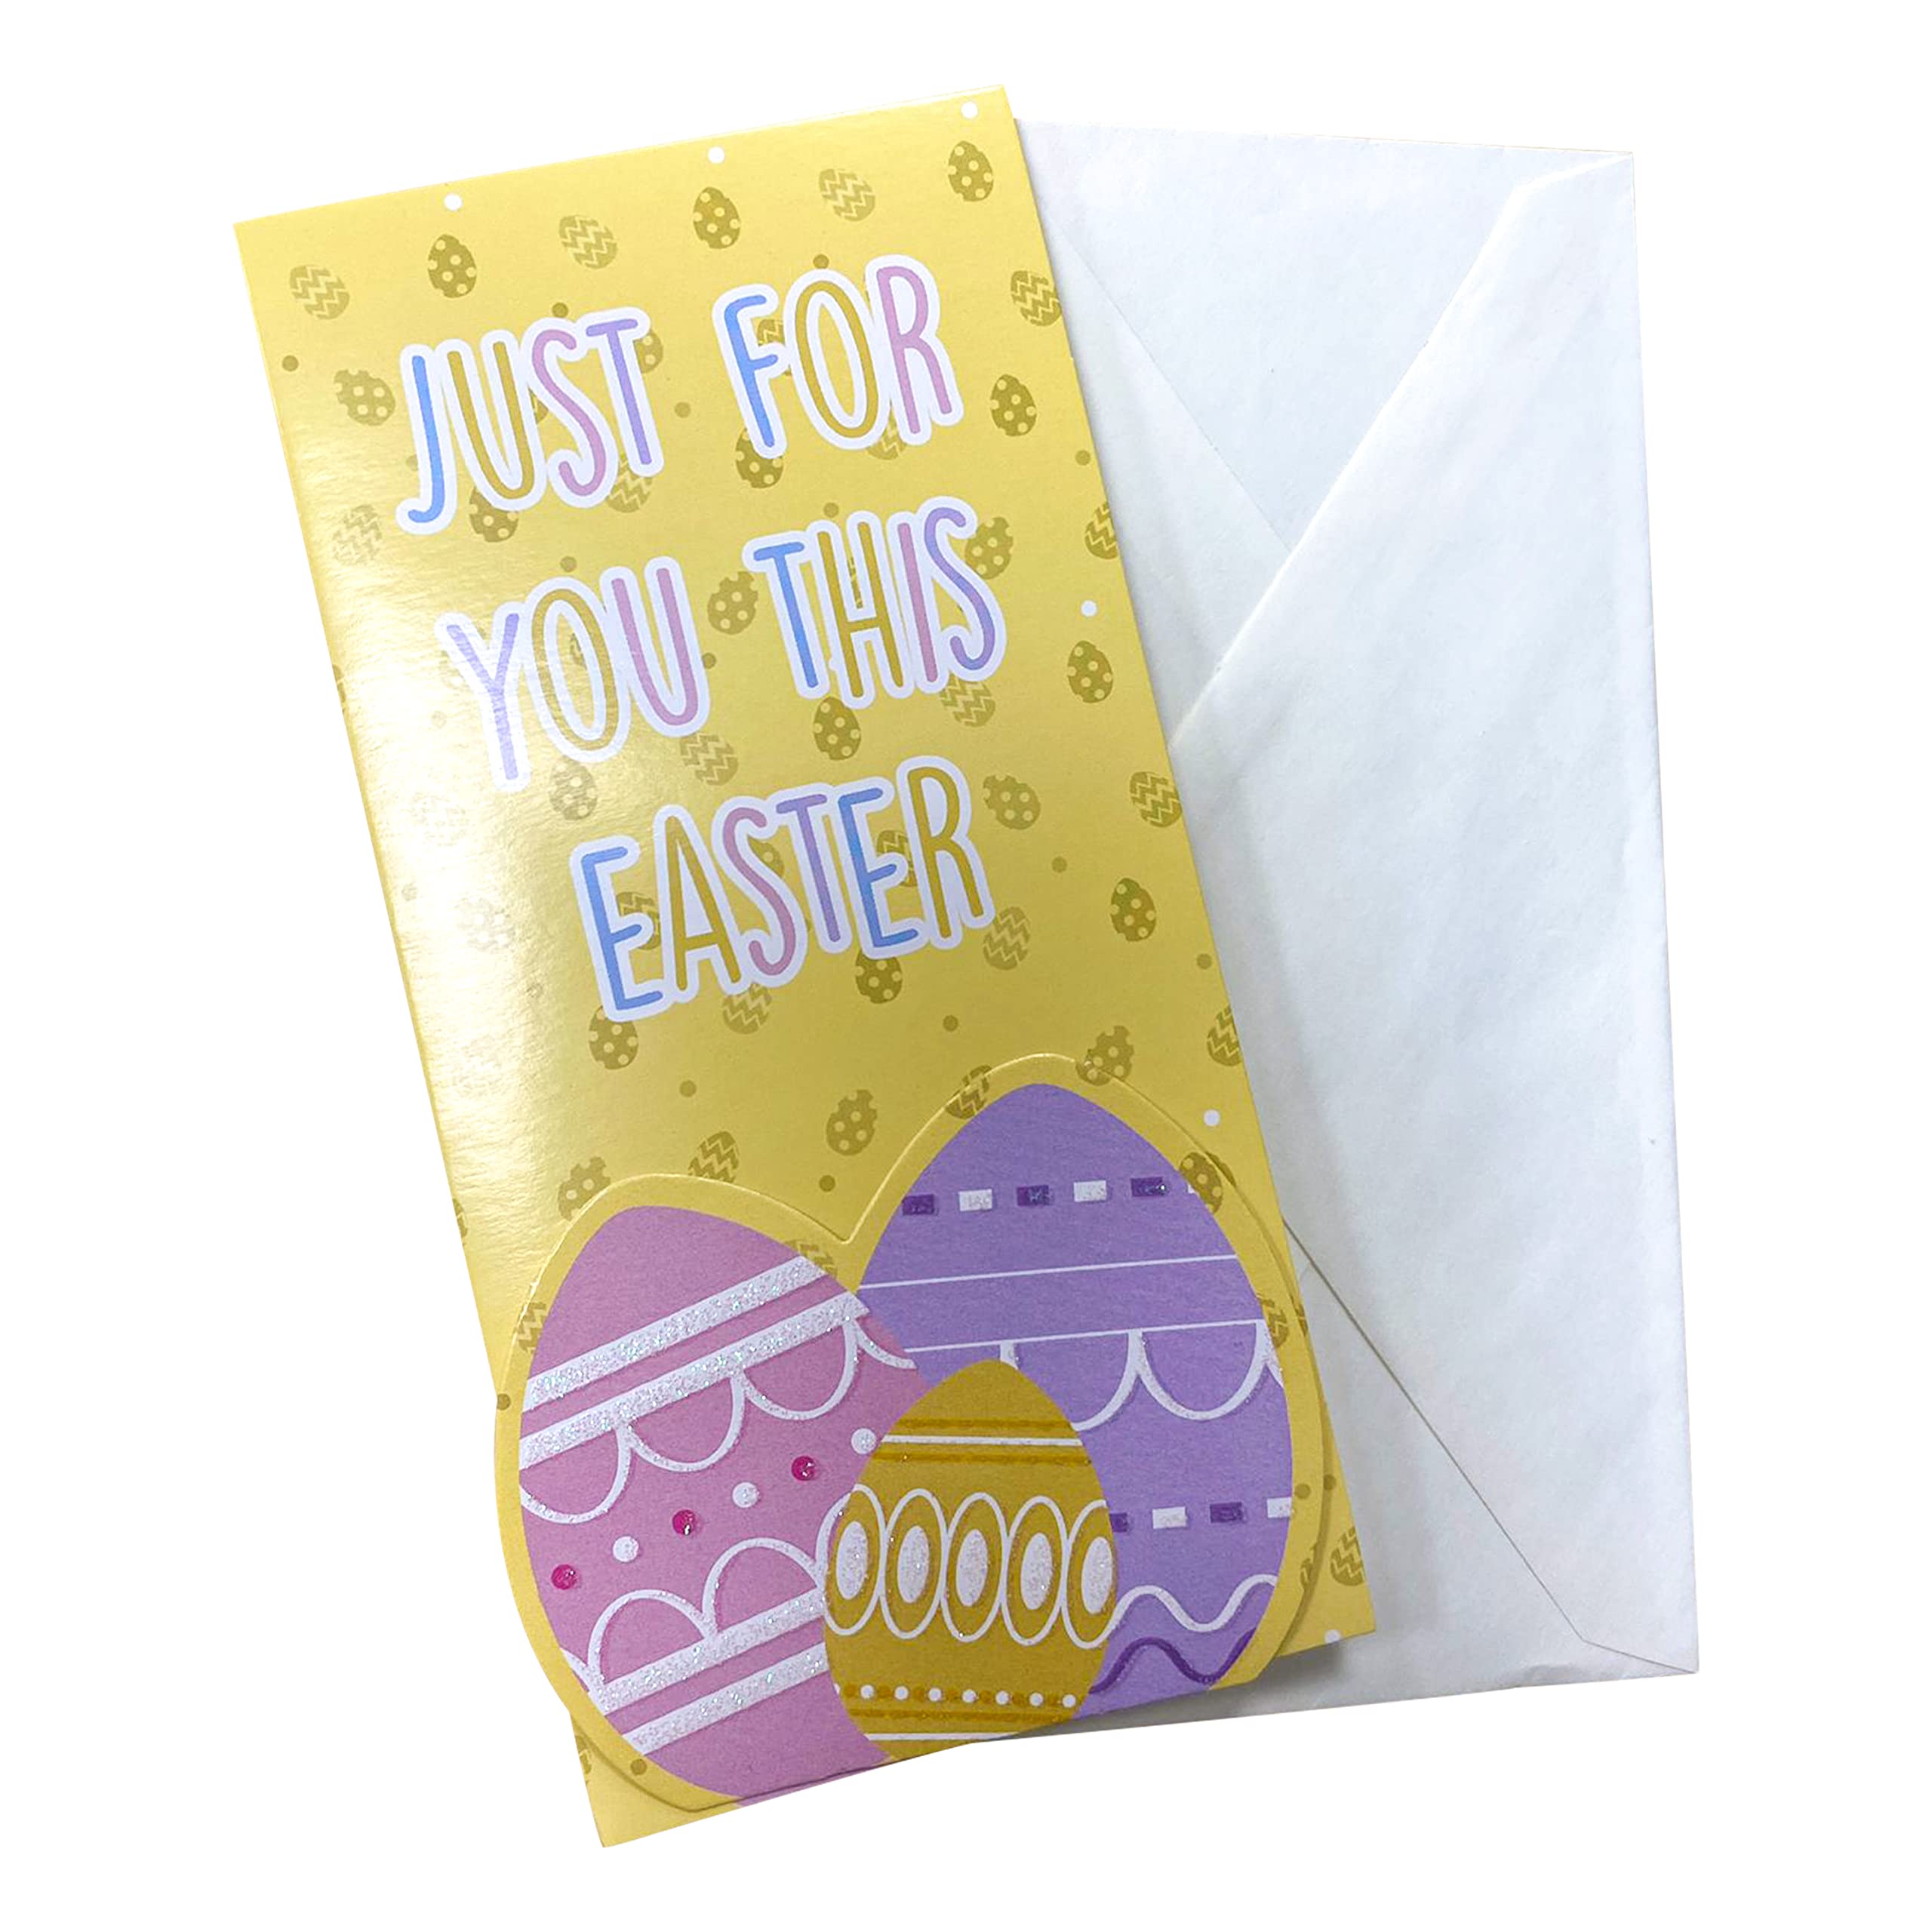 12x Card Wallets with Envelopes, Gift Voucher, Money Wallets for Cash Gifts, Money Envelopes, Easter Cards, Ideal for Sending Money At Easter, Size - 17cm